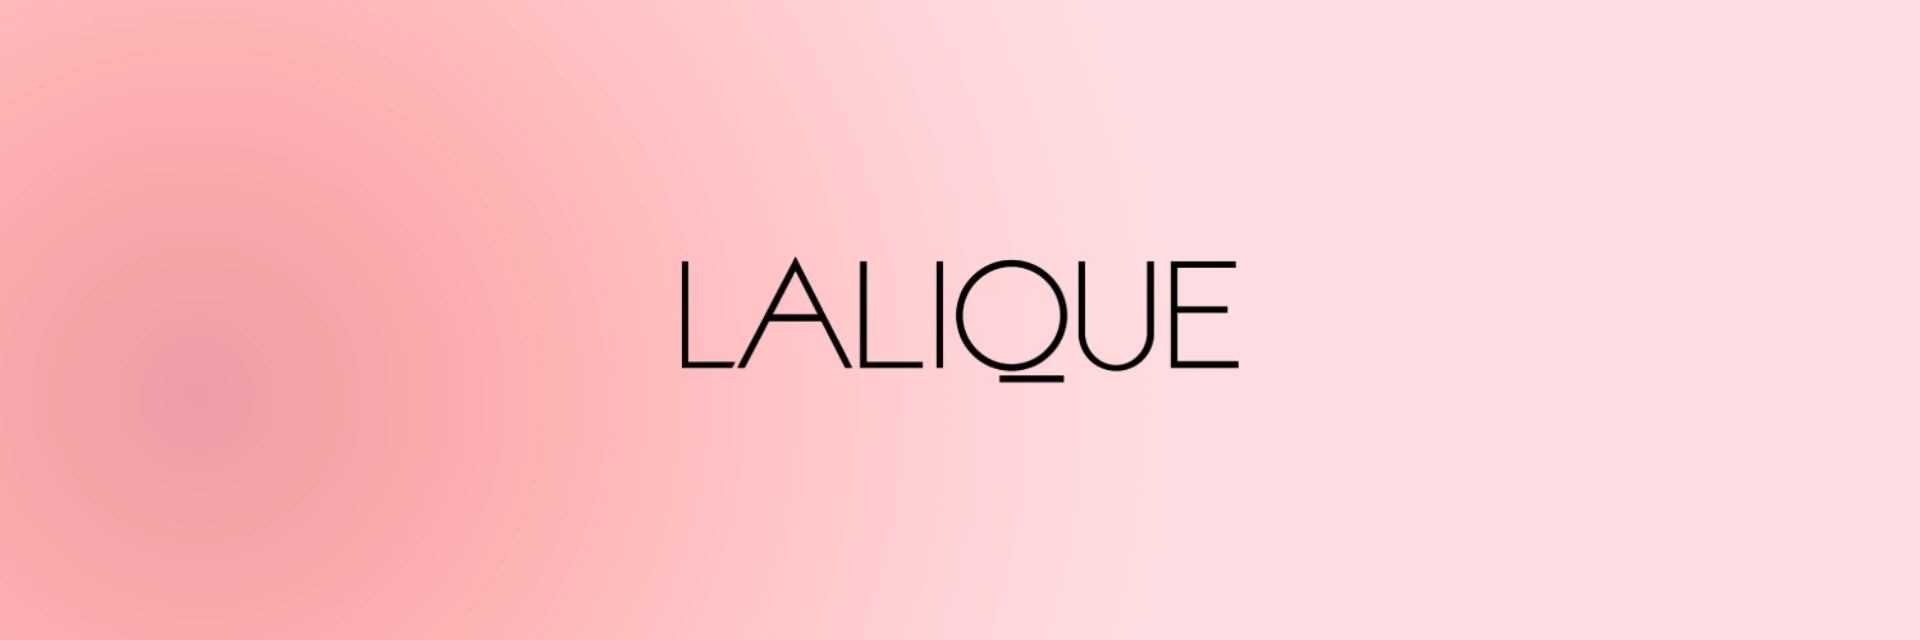 Lalique perfume brand banner image